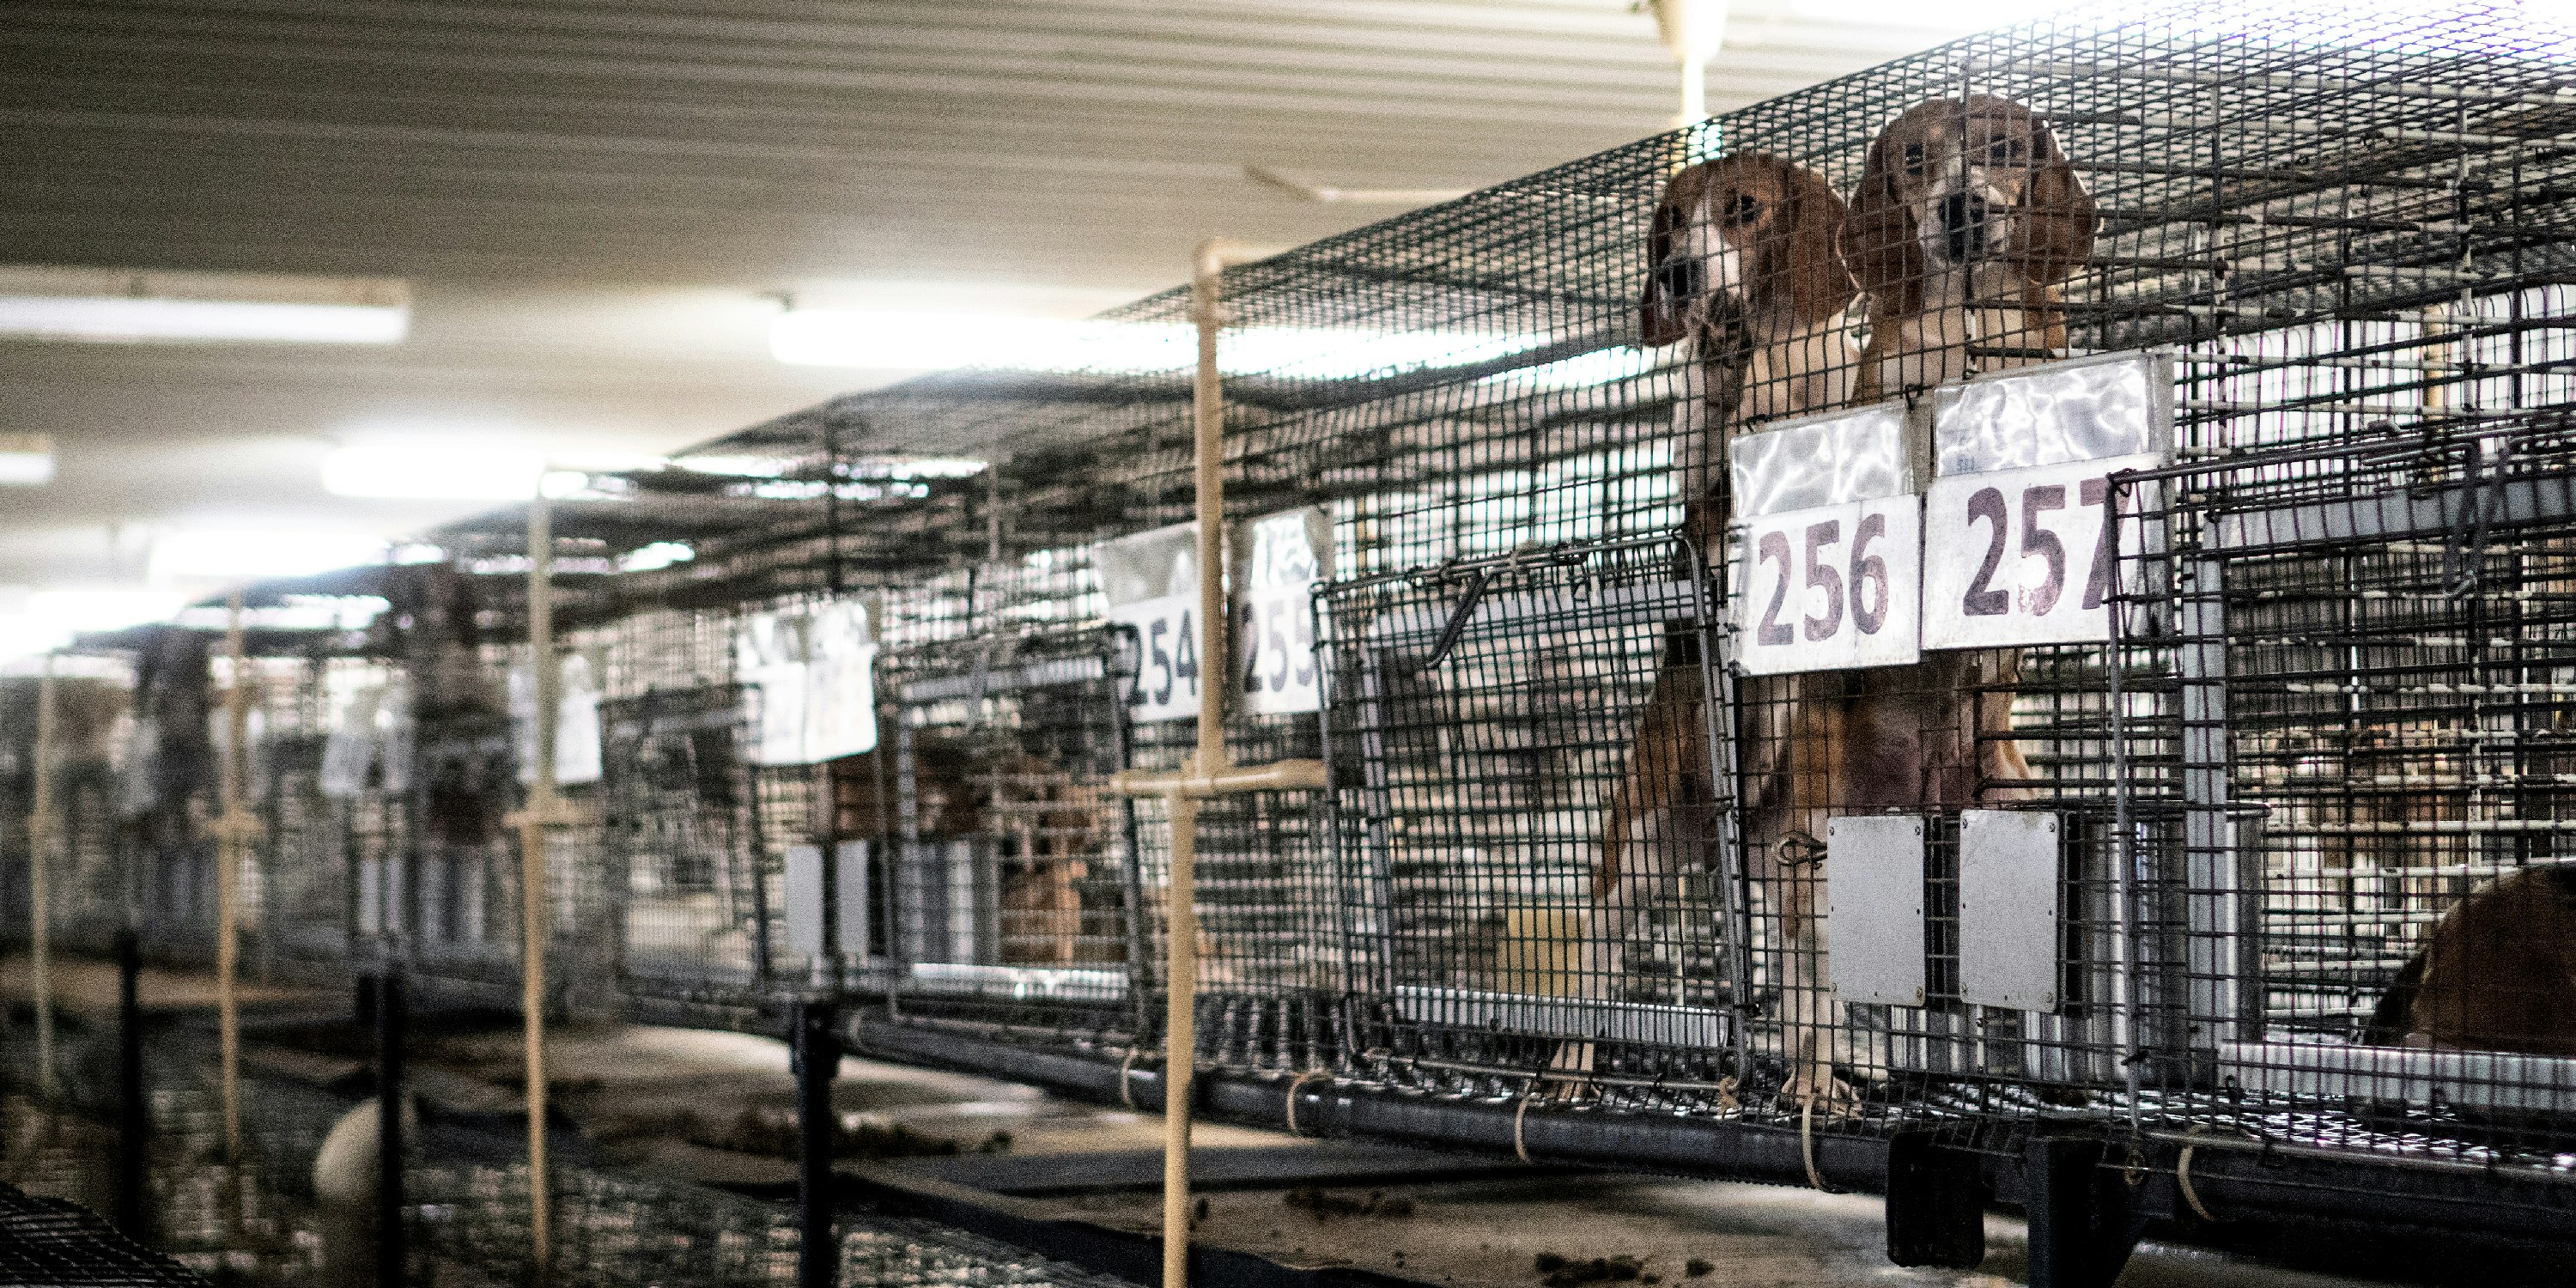 Inside the Barbaric . Industry of Dog Experimentation